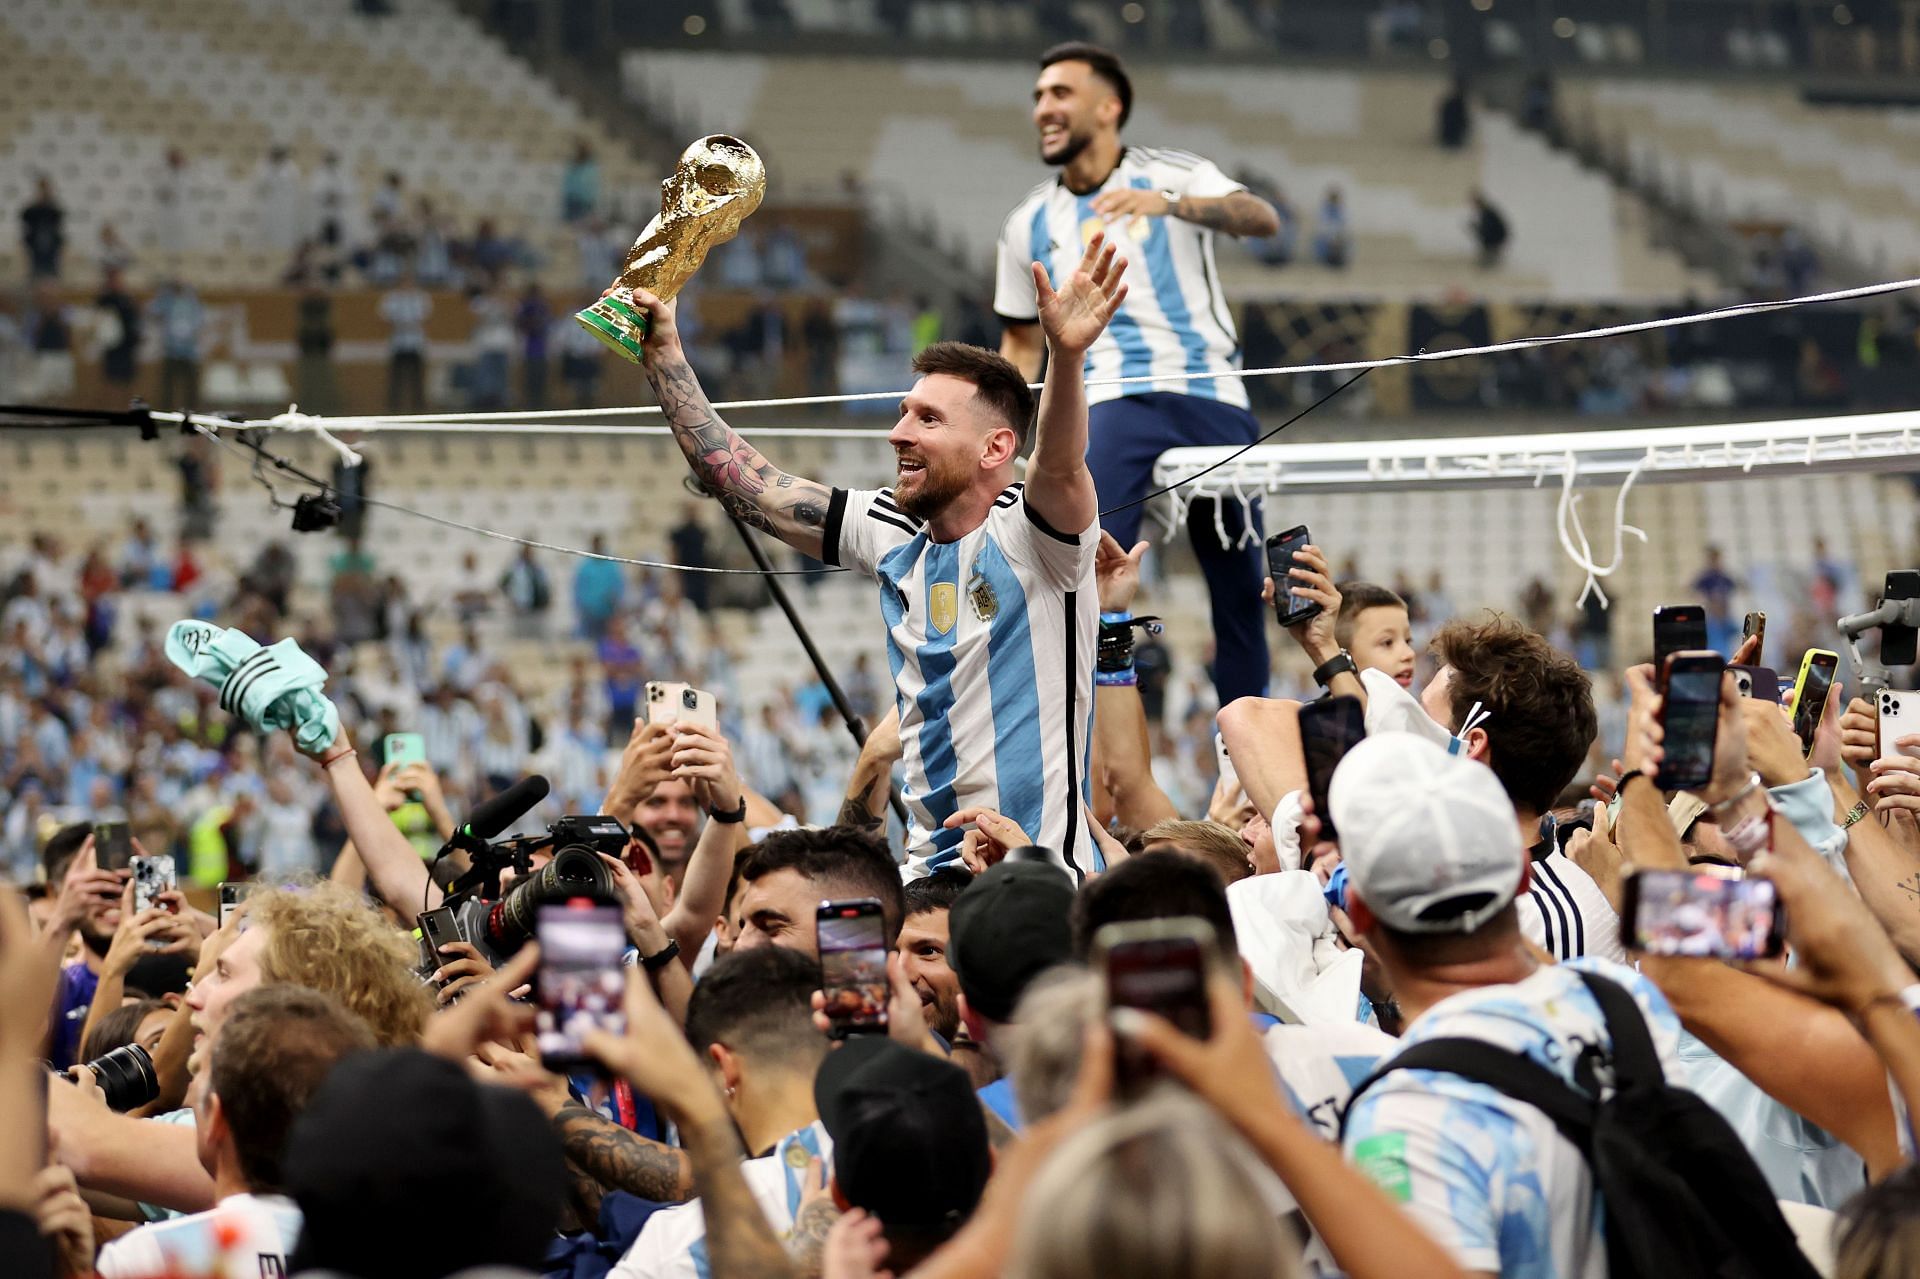 Lionel Messi finally got his hands on the FIFA World Cup